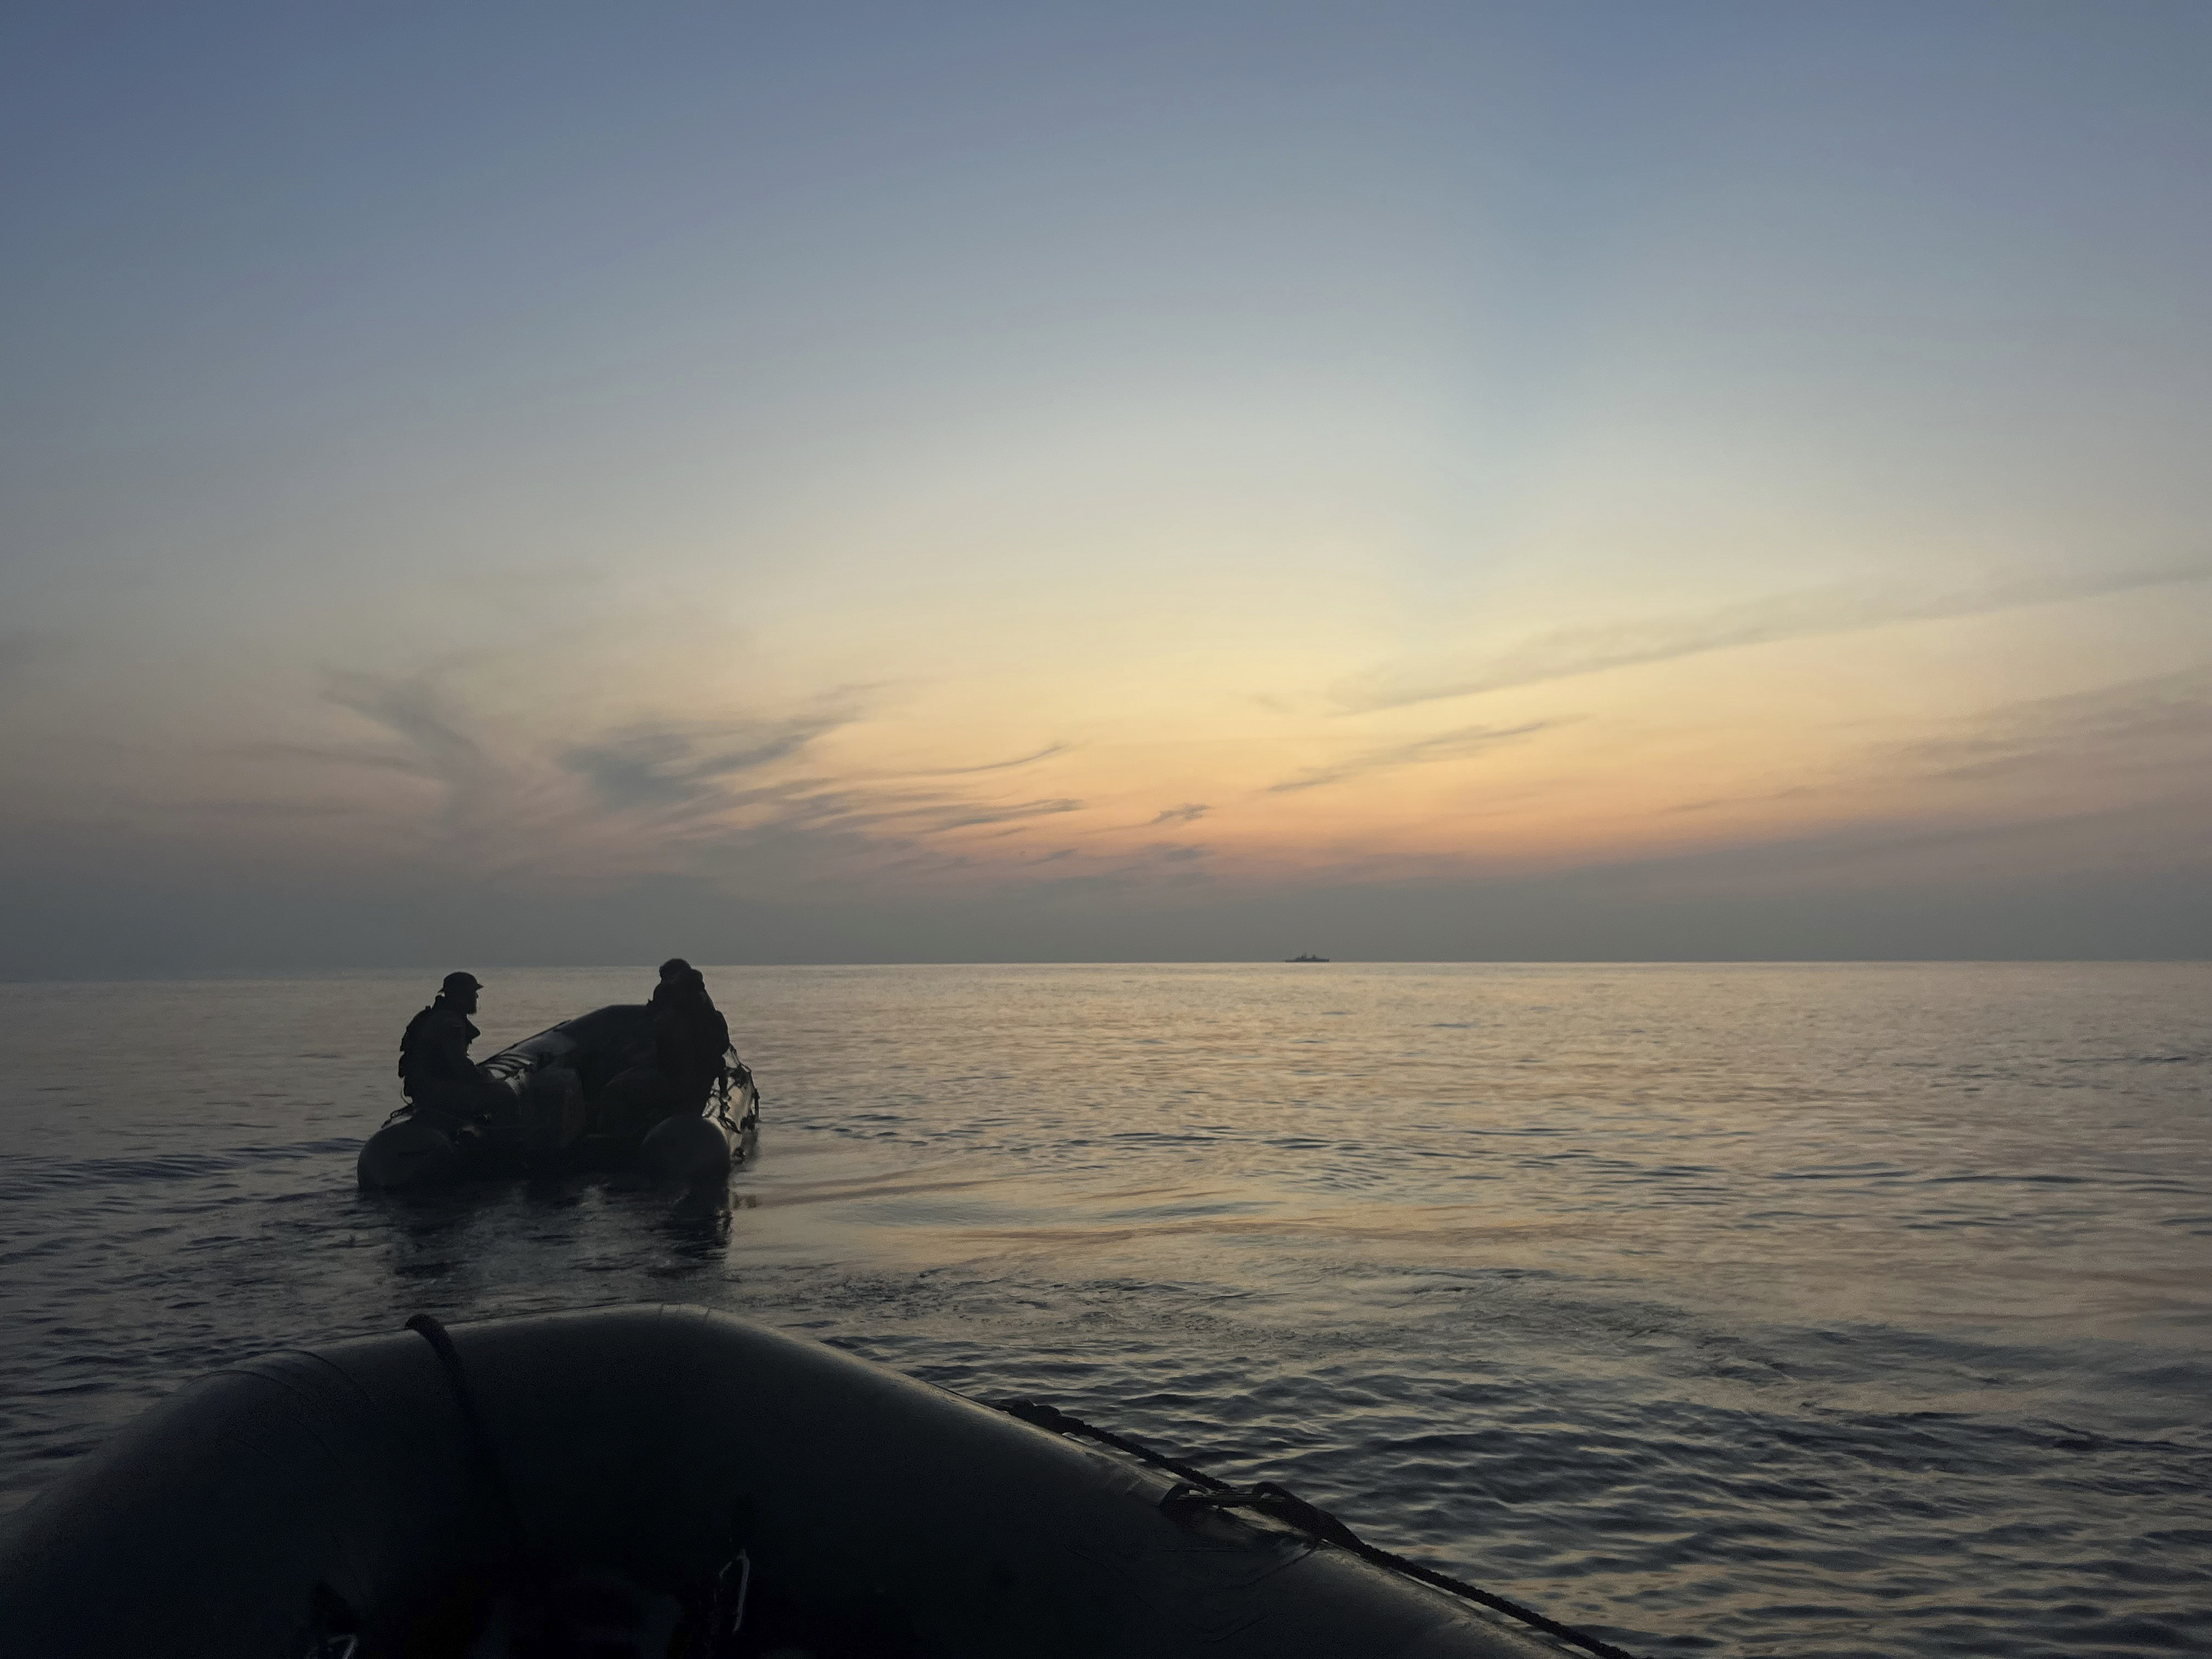 small boat and military personnel on the ocean at sunset